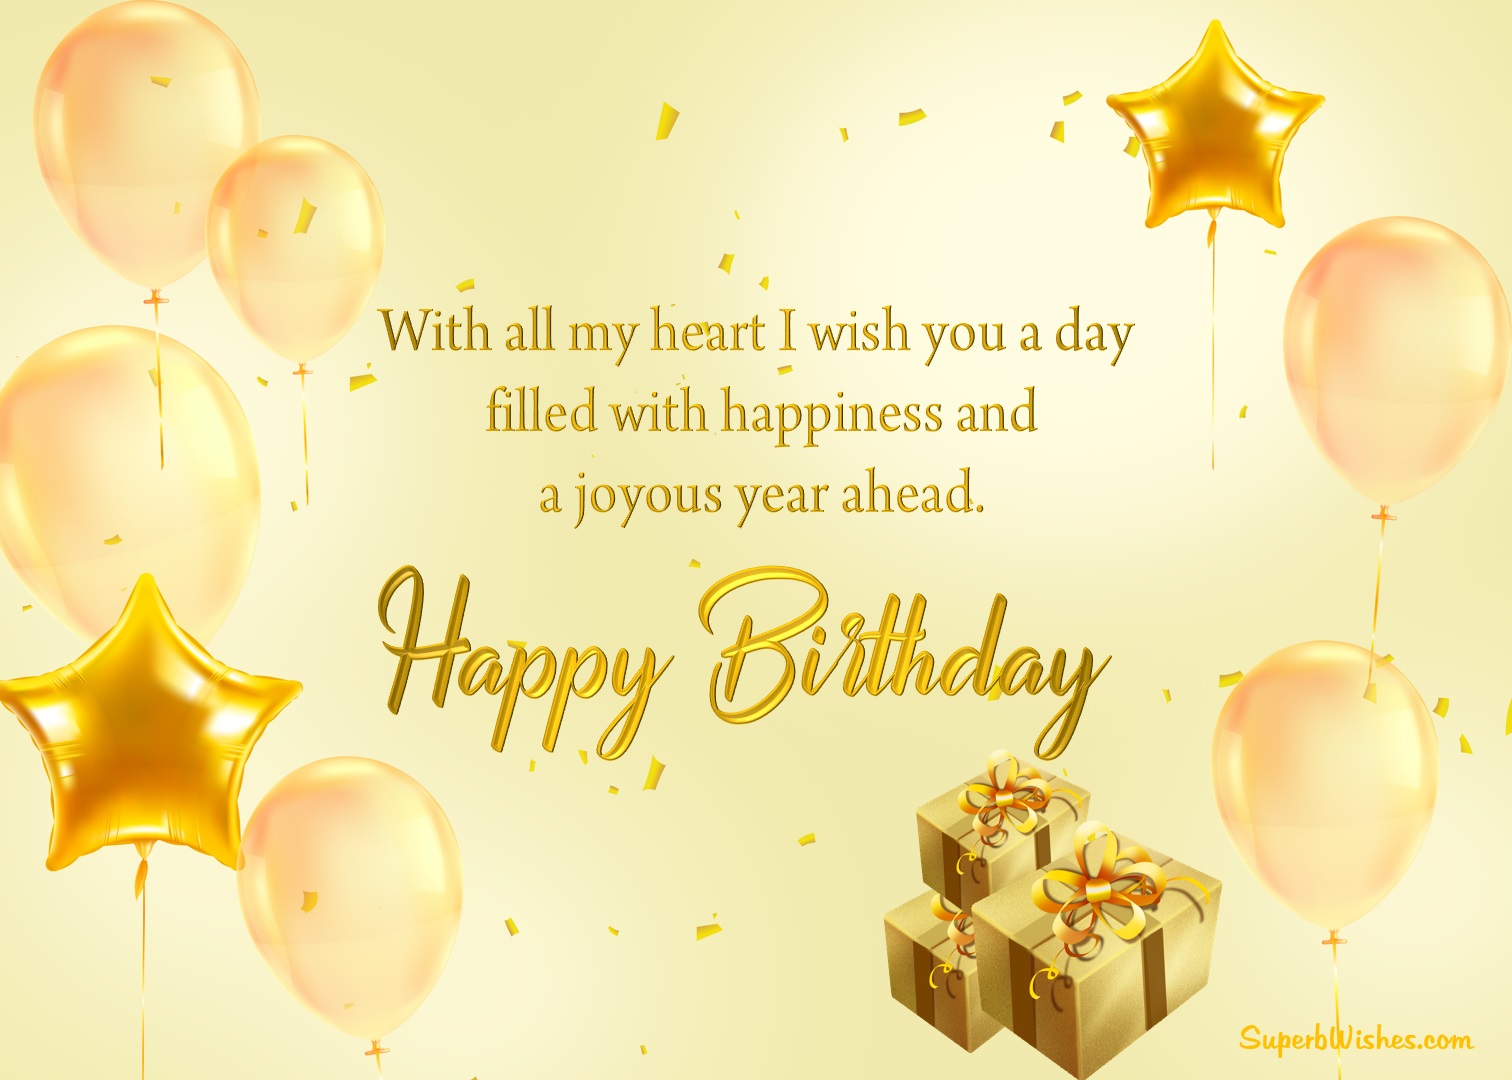 Happy Birthday Wishes Images | Birthday Greetings | SuperbWishes